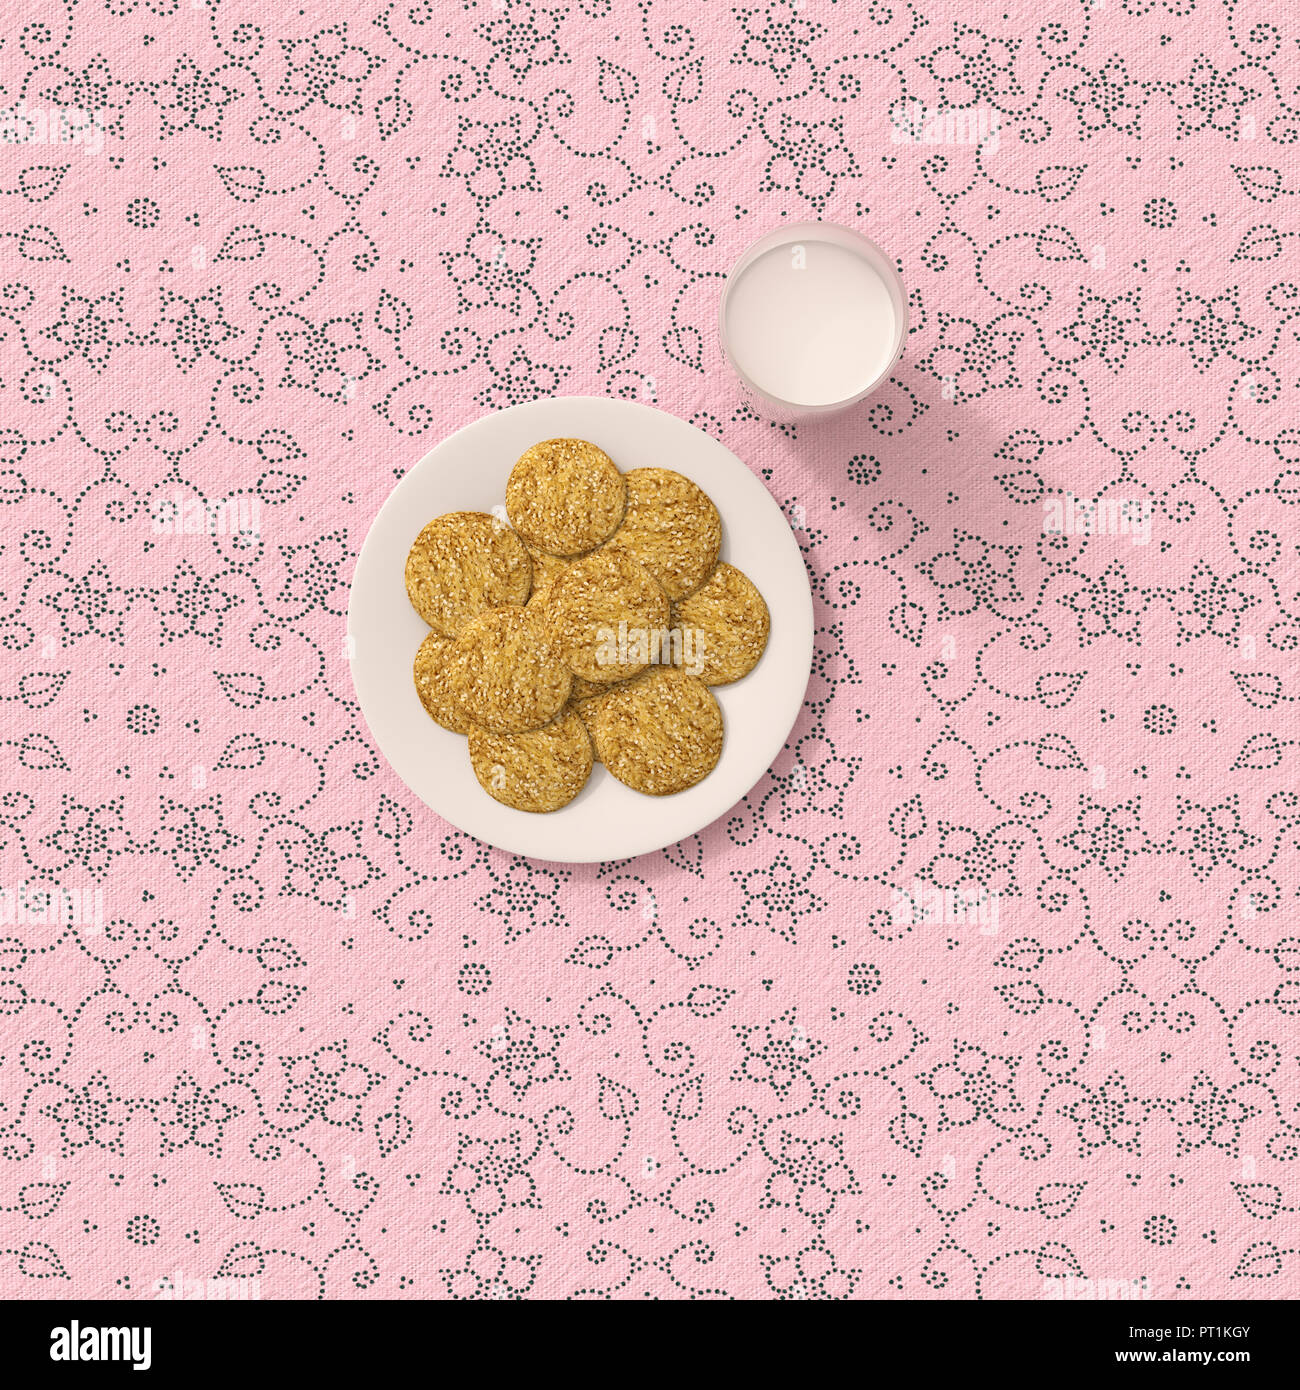 3D rendering, Oatmeal cookies on table cloth with floral pattern Stock Photo